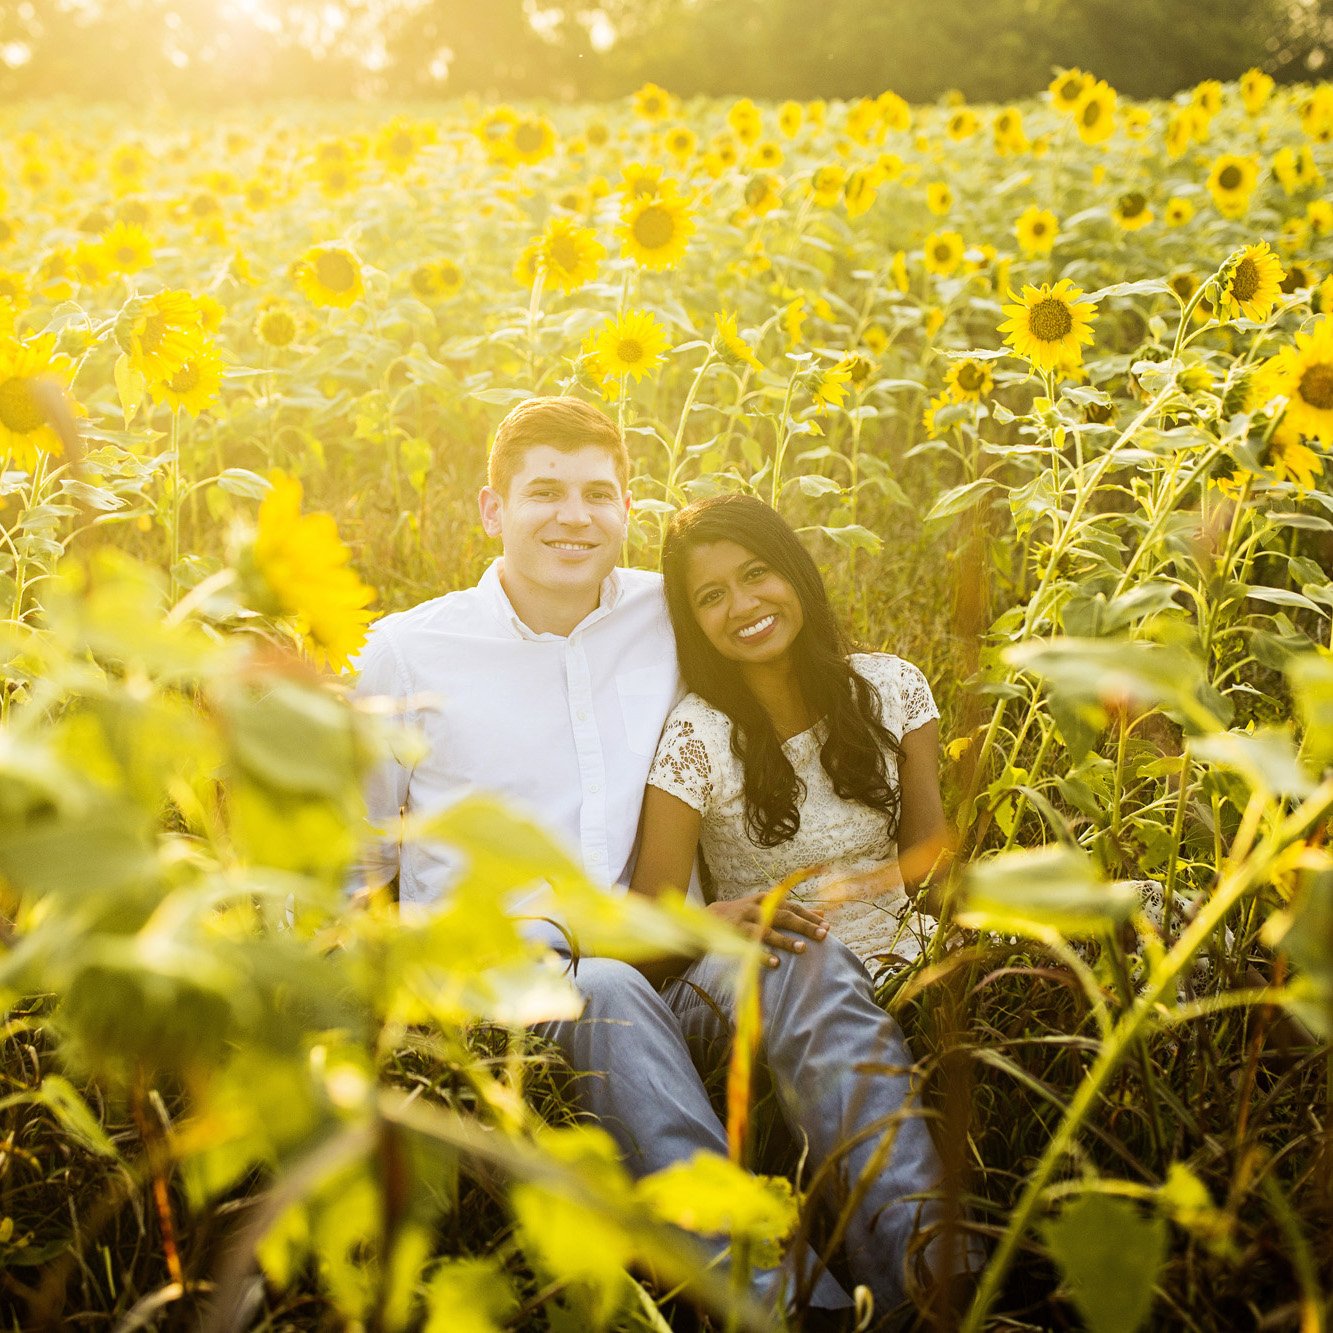 Seriously_Sabrina_Photography_Lexington_Midway_Kentucky_Engagement_Merefield_Sunflowers_Naz_and_Drew16.jpg